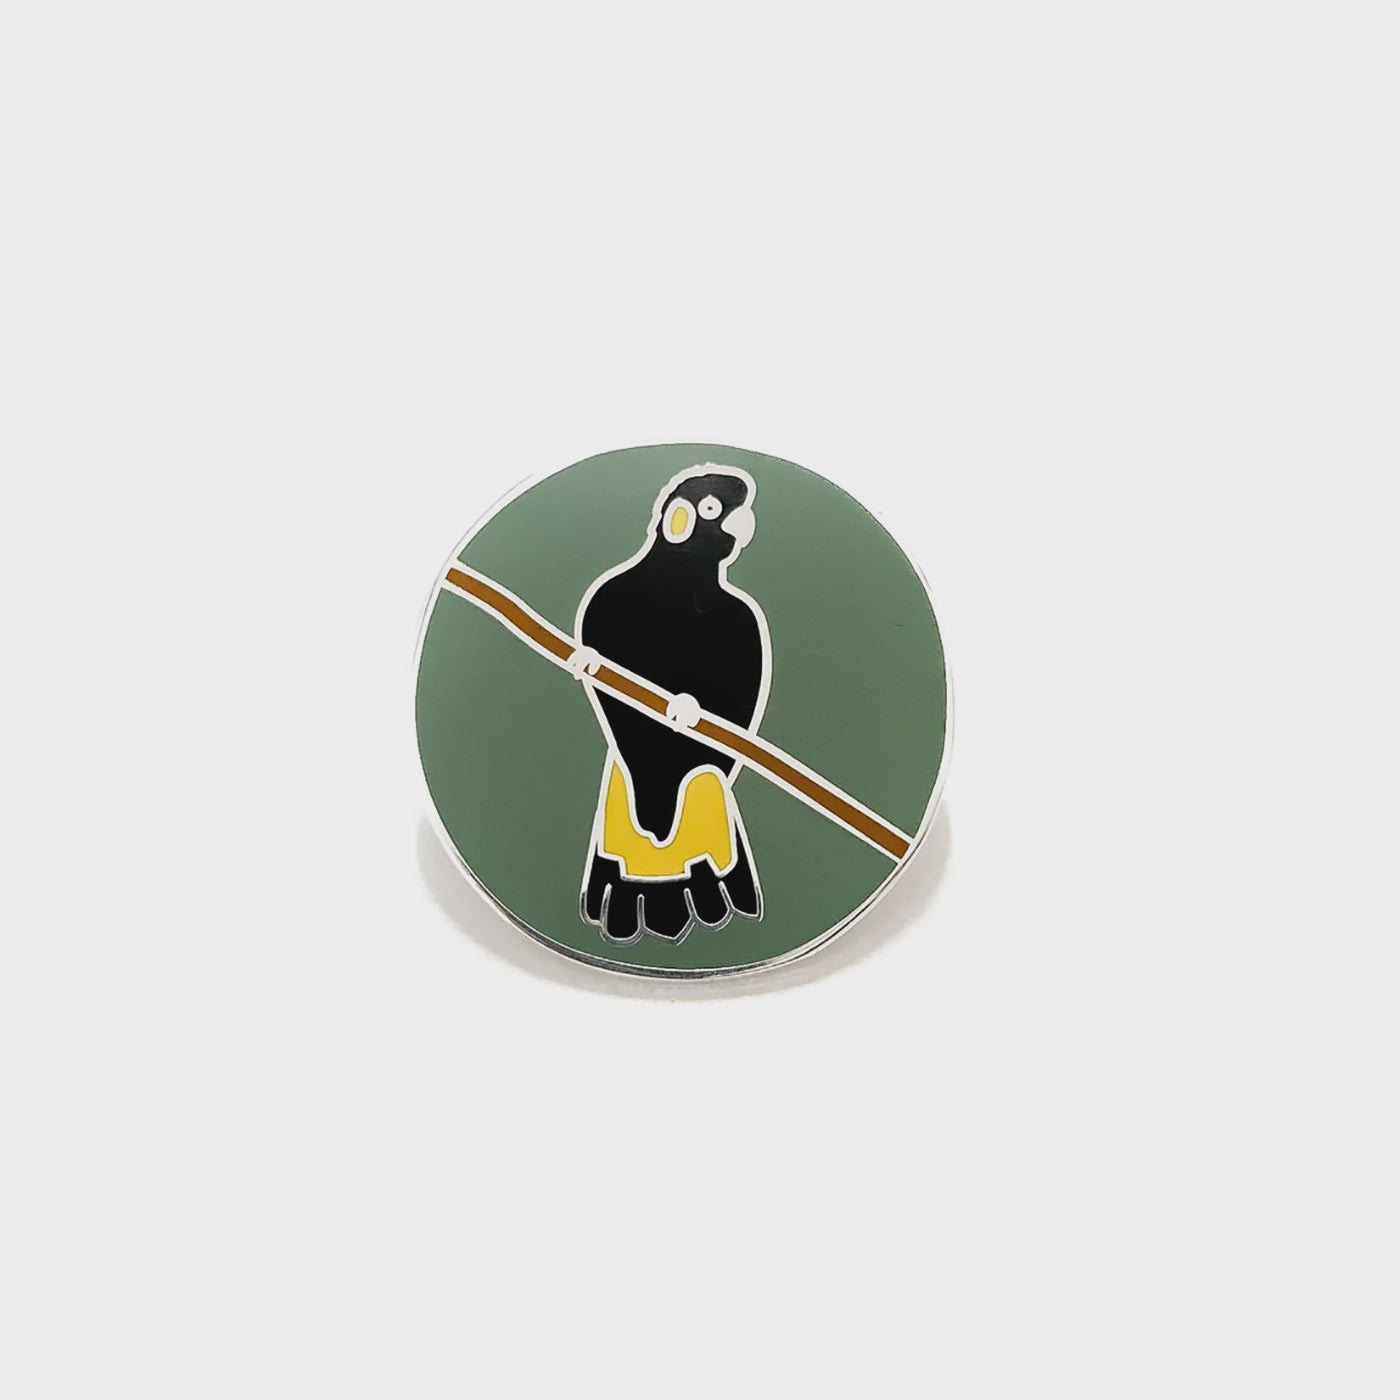 T.J.Finch - Enamel Pin - Yellow-Tailed Black Cockatoo (Olive)